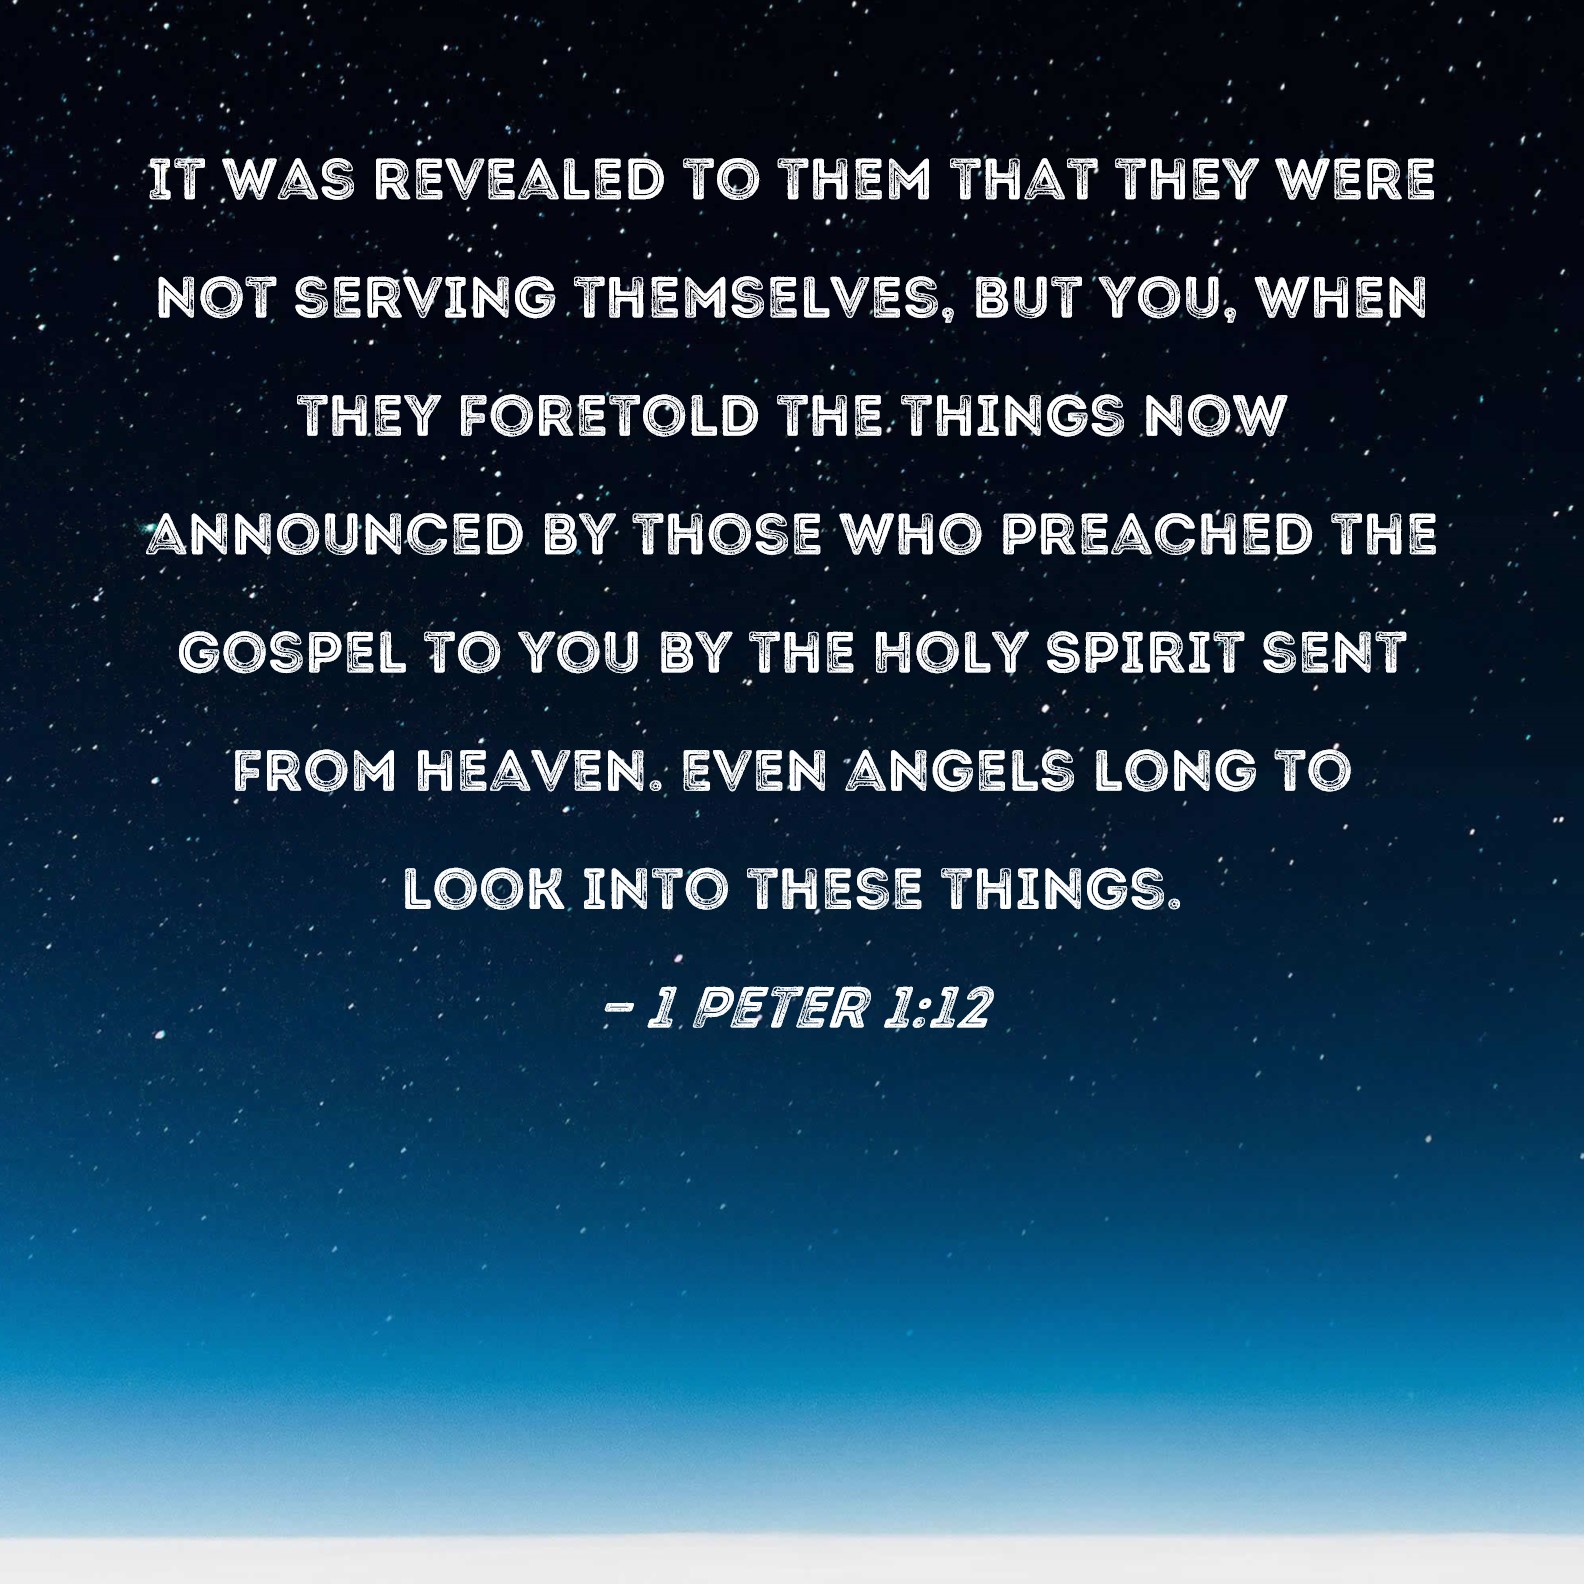 1-peter-1-12-it-was-revealed-to-them-that-they-were-not-serving-themselves-but-you-when-they